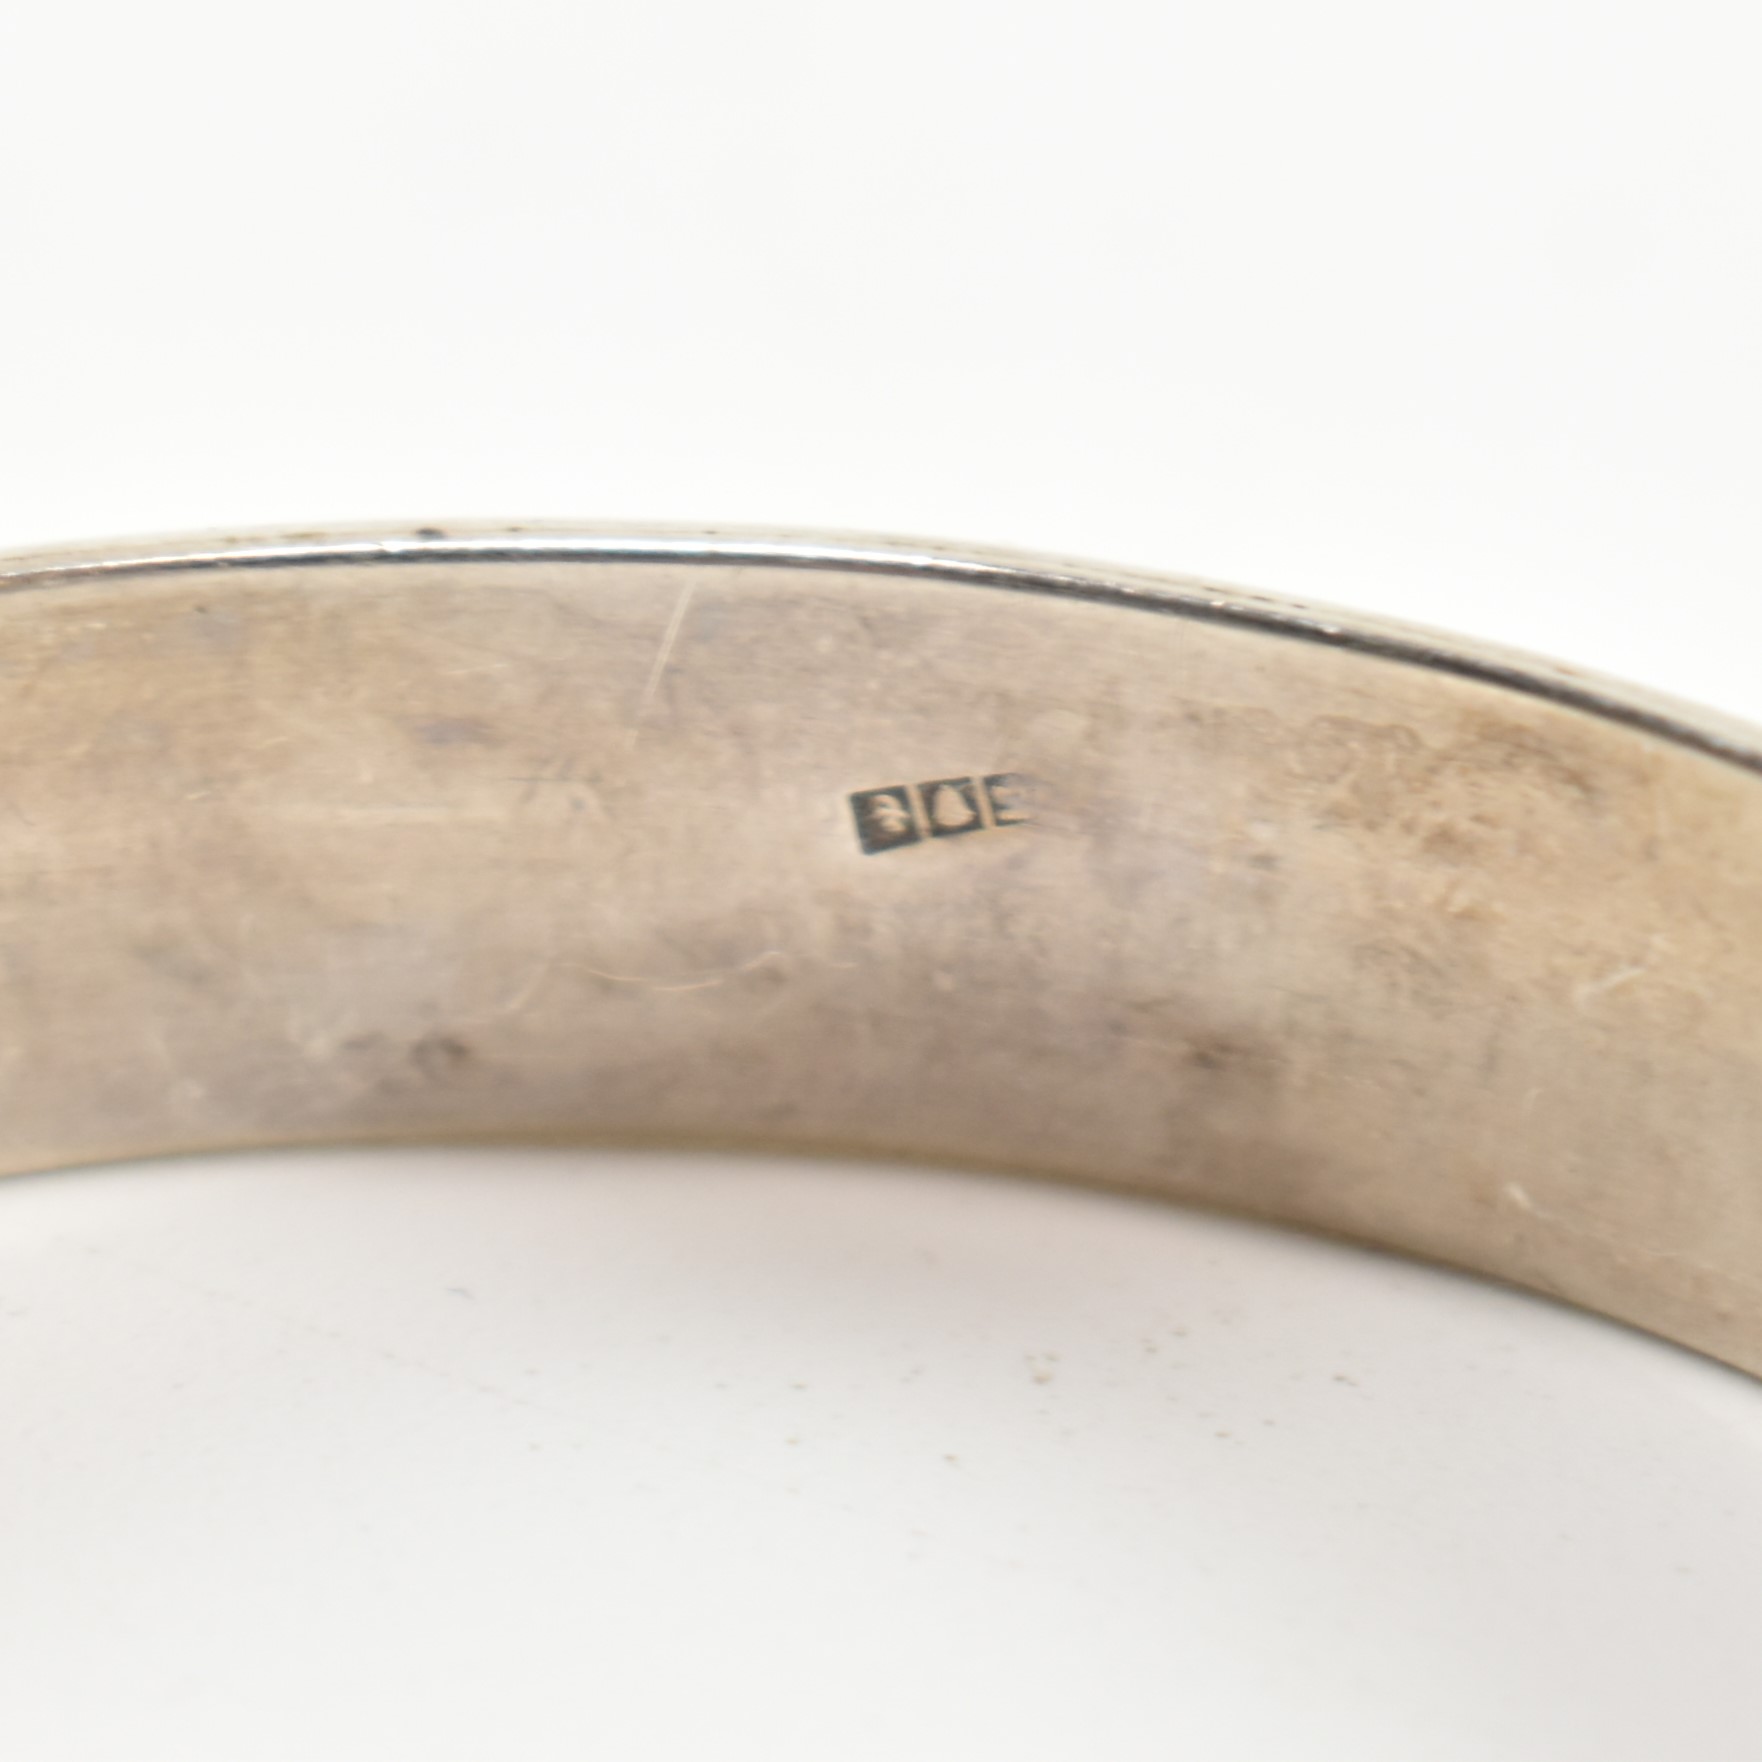 TWO SILVER BANGLES - Image 5 of 6